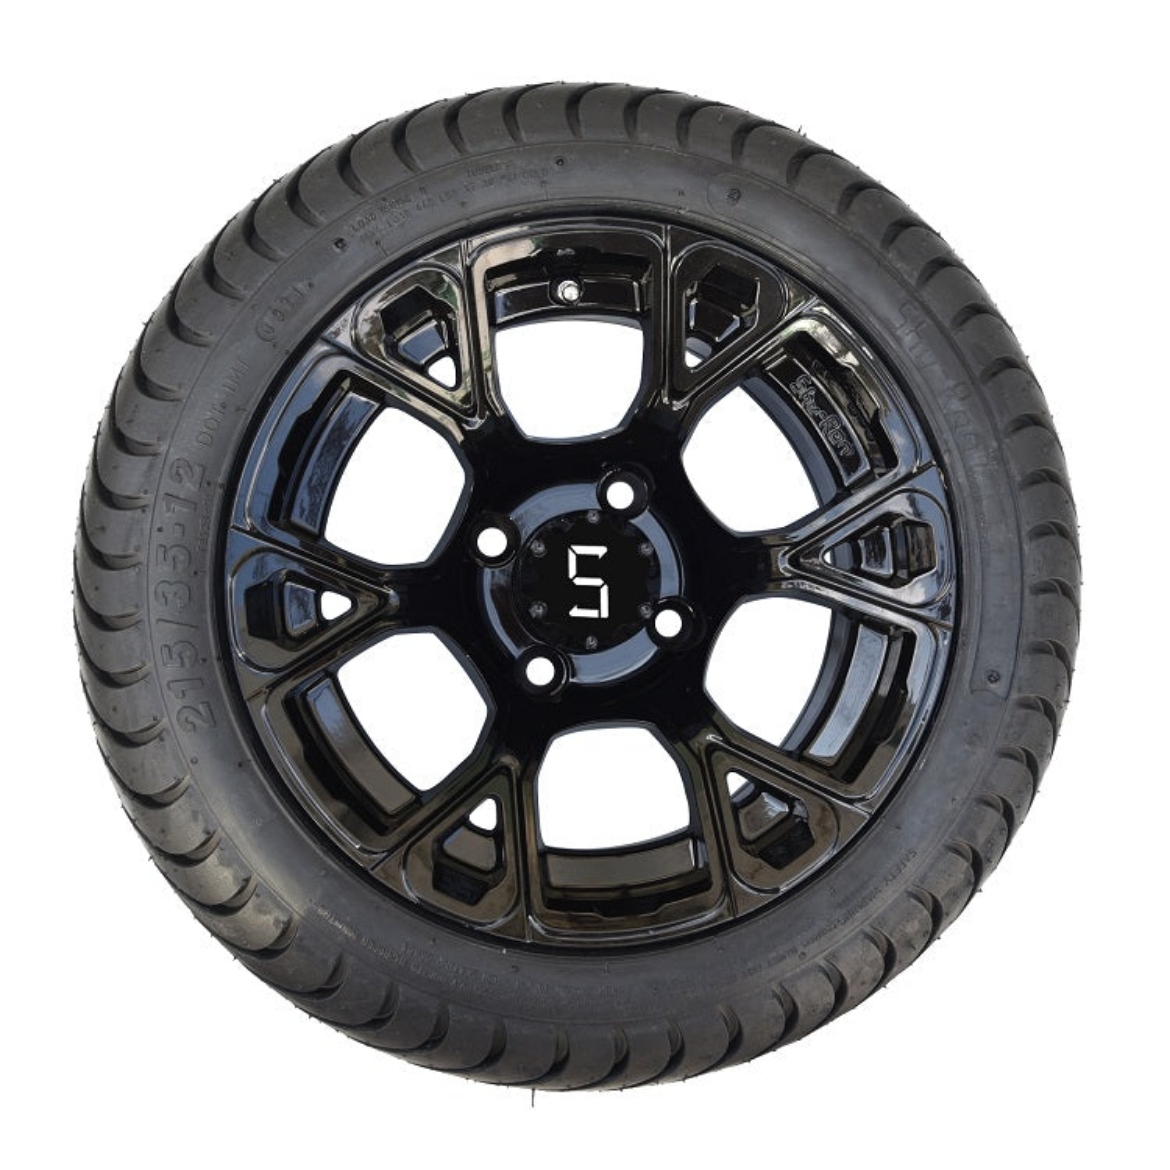 Picture of 12" WHEEL AND 215/35-12 TYRE COMBO (BLACK). $690 PER SET